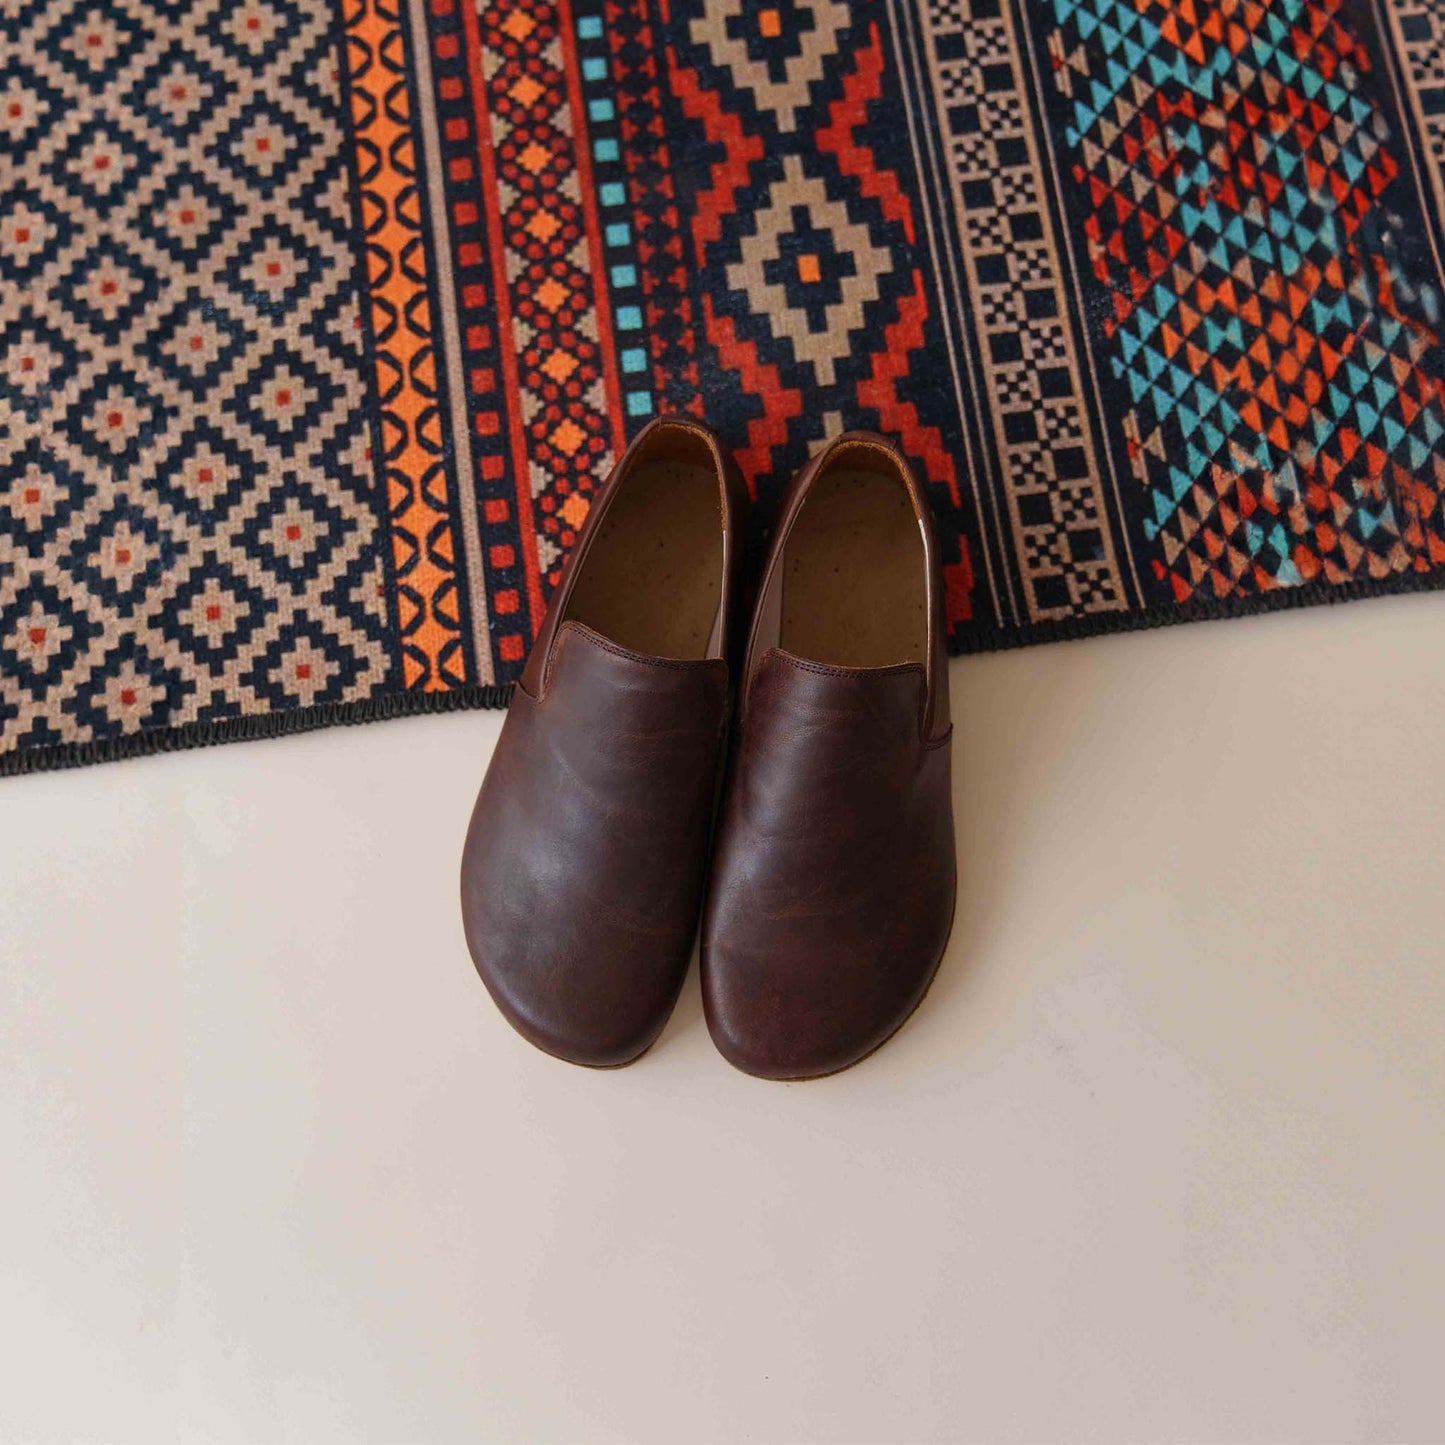 Pair of Aeolia brown leather barefoot men loafers displayed on a colorful rug, ideal for promoting natural walking. Shop now at pelanir.com!